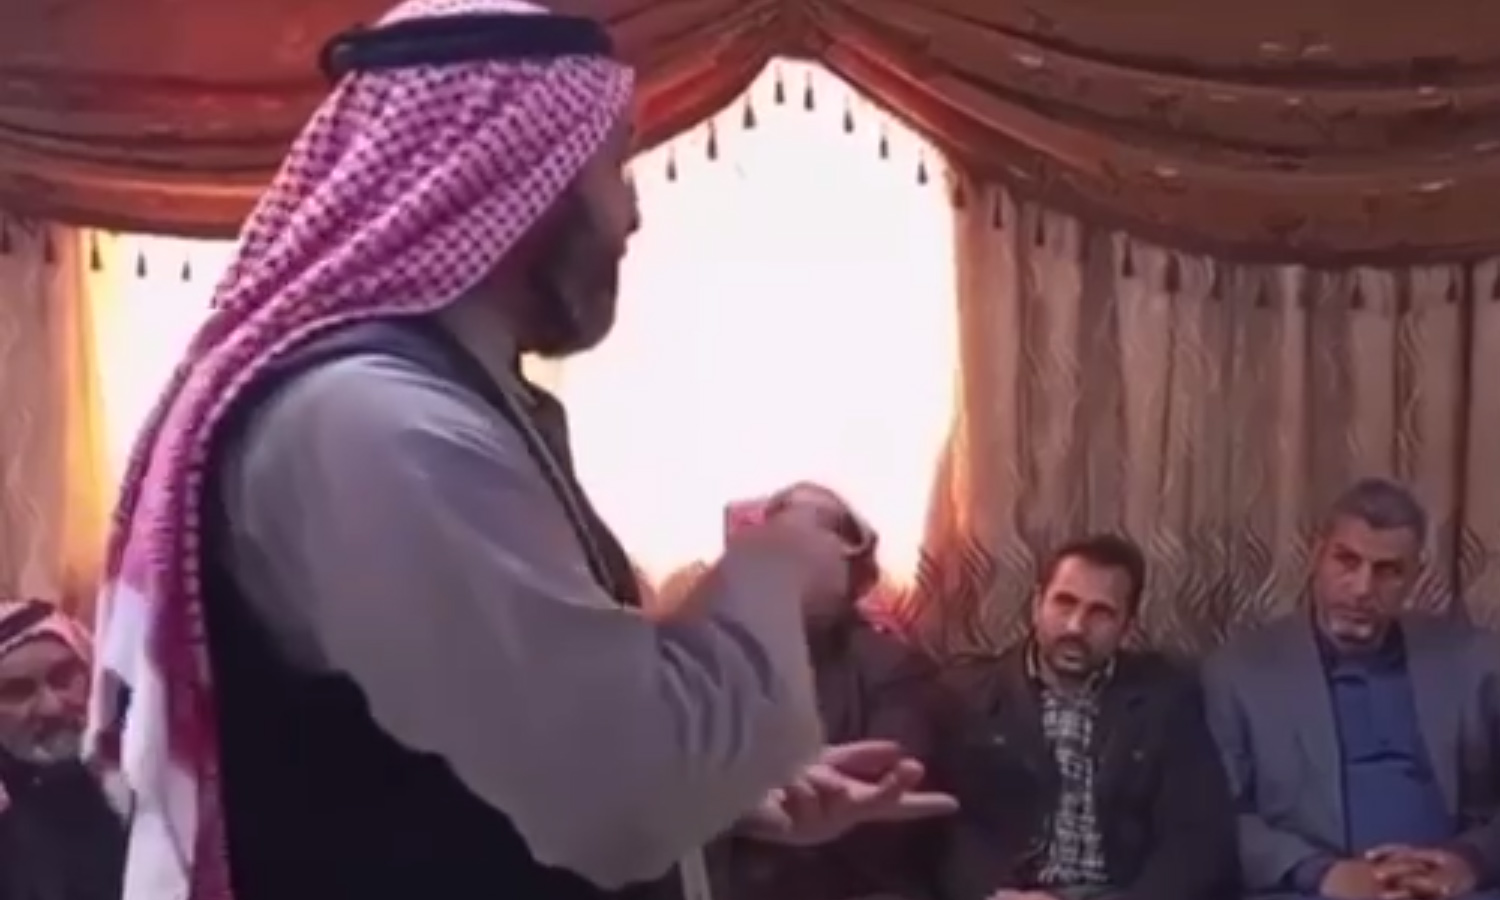 A meeting between elders from Deir Ezzor governorate and representatives of the “Autonomous Administration” - 21 March 2022 (Al-Sharqiya Correspondent news network)